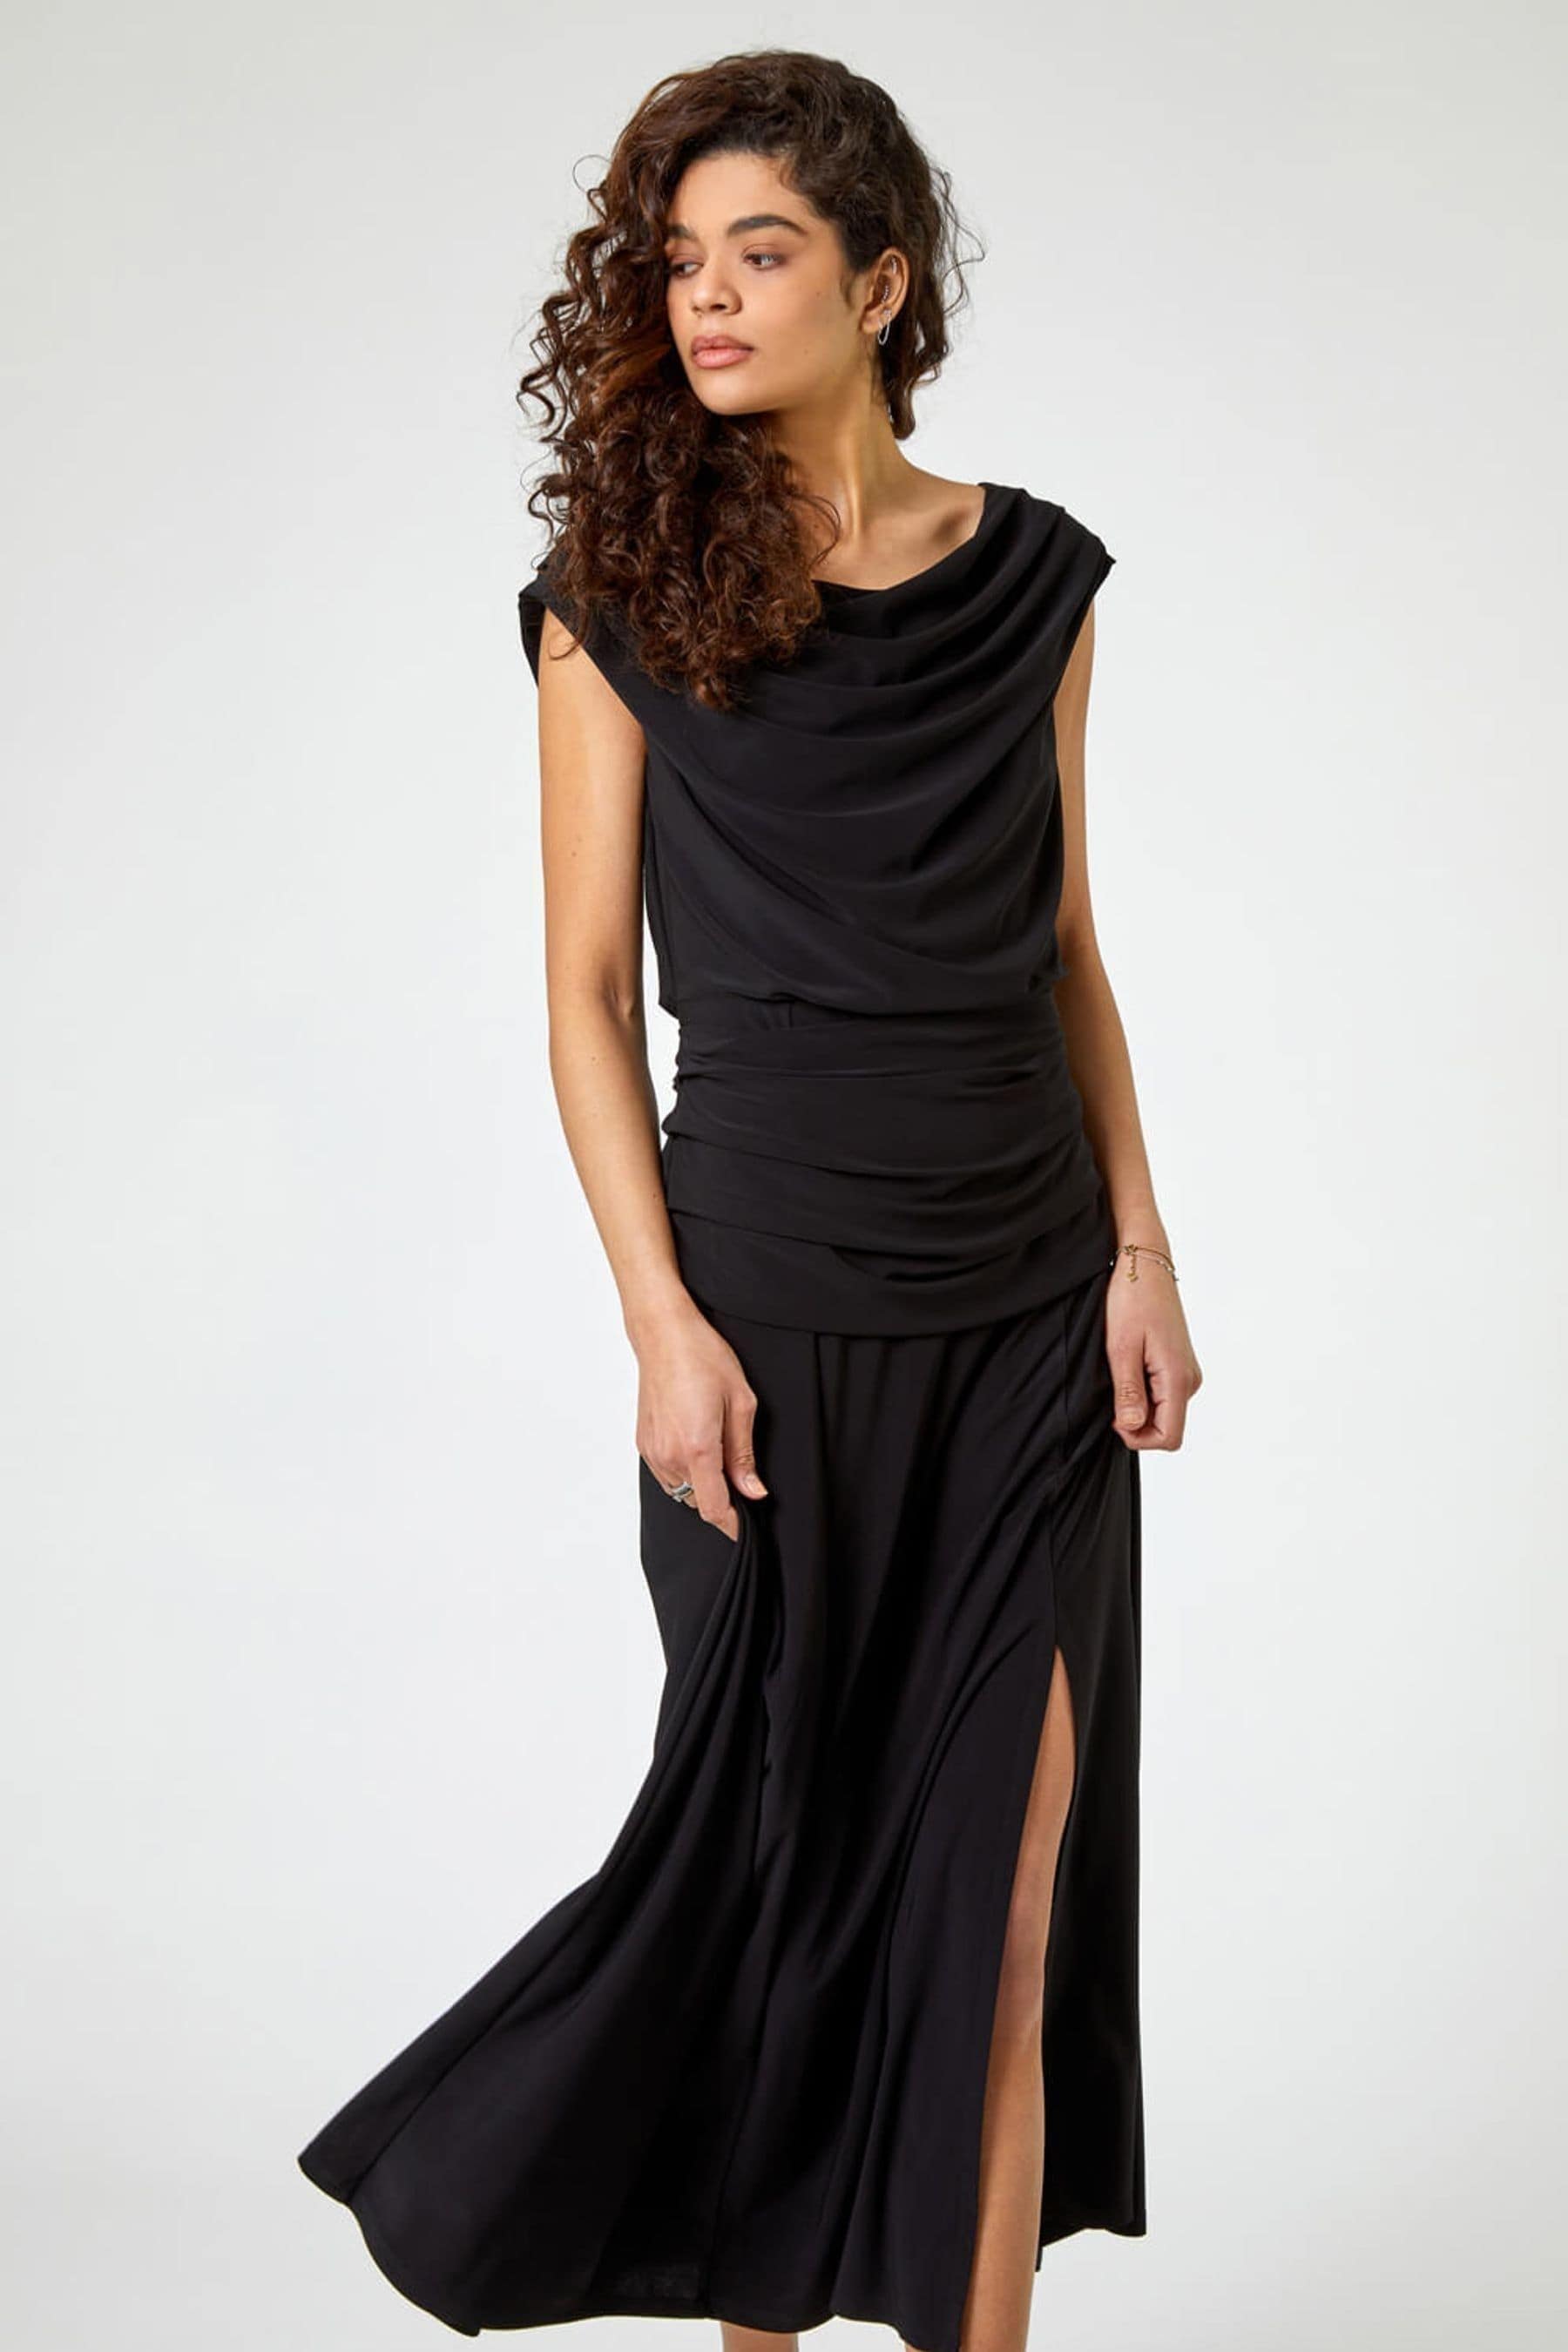 Buy Roman Black Cowl Neck Ruched Maxi Dress from the Next UK online shop